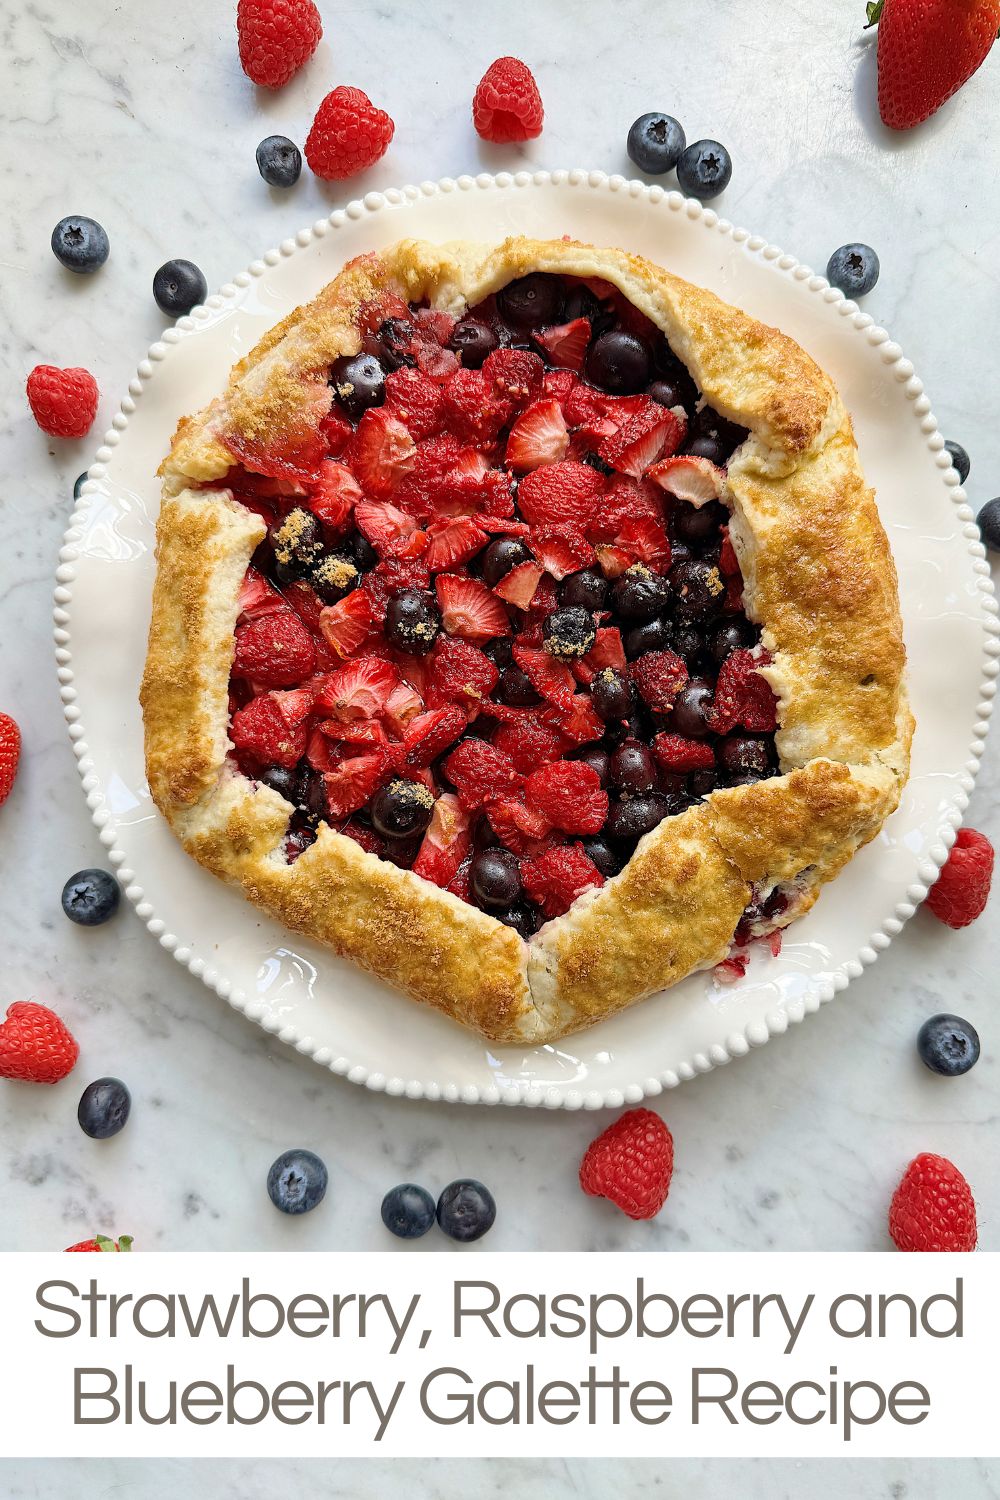 Mother's Day is just around the corner, and what better way to celebrate the moms in our lives than with a homemade Strawberry, Raspberry, and Blueberry Galette? 